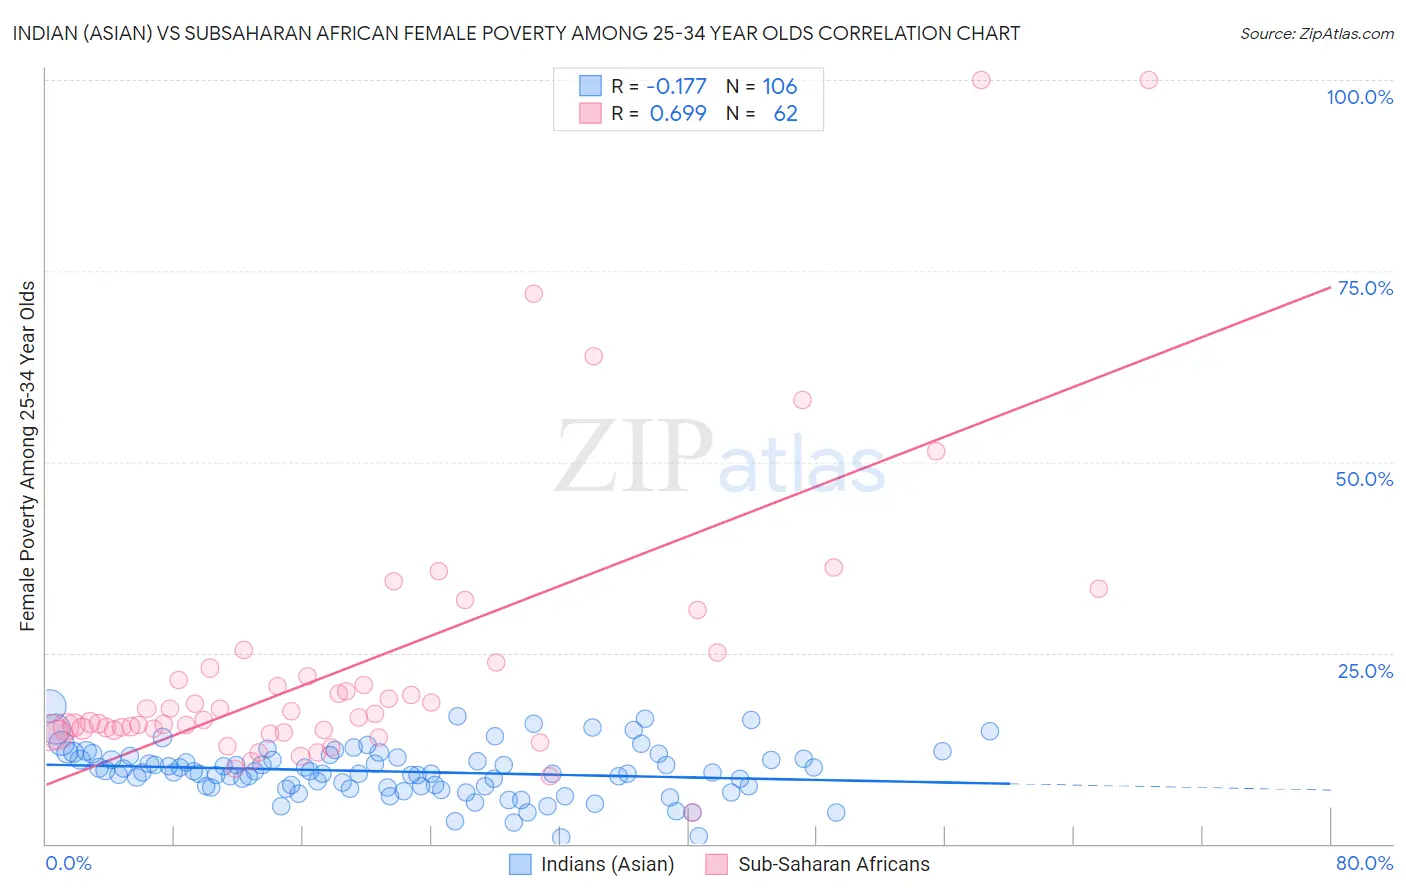 Indian (Asian) vs Subsaharan African Female Poverty Among 25-34 Year Olds